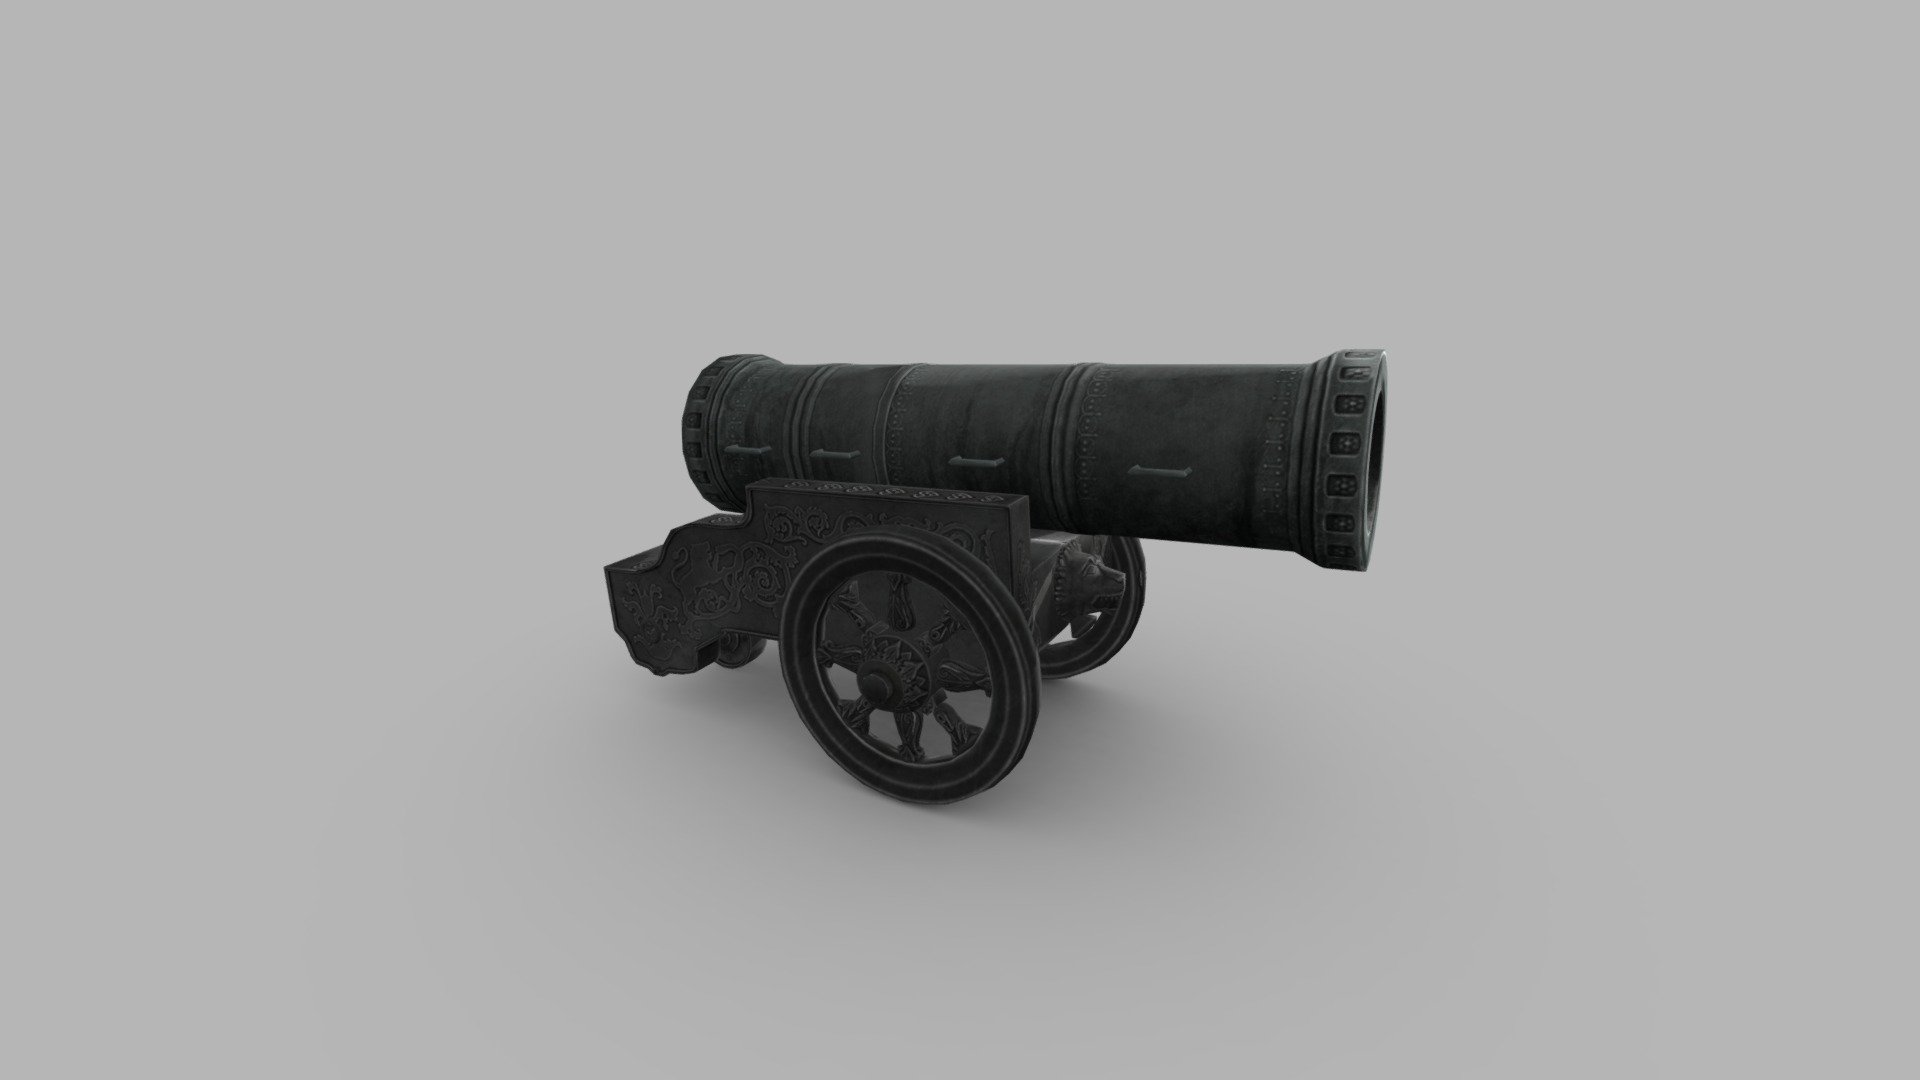 Our class was given 5 days to create the Tsar Cannon 3d model